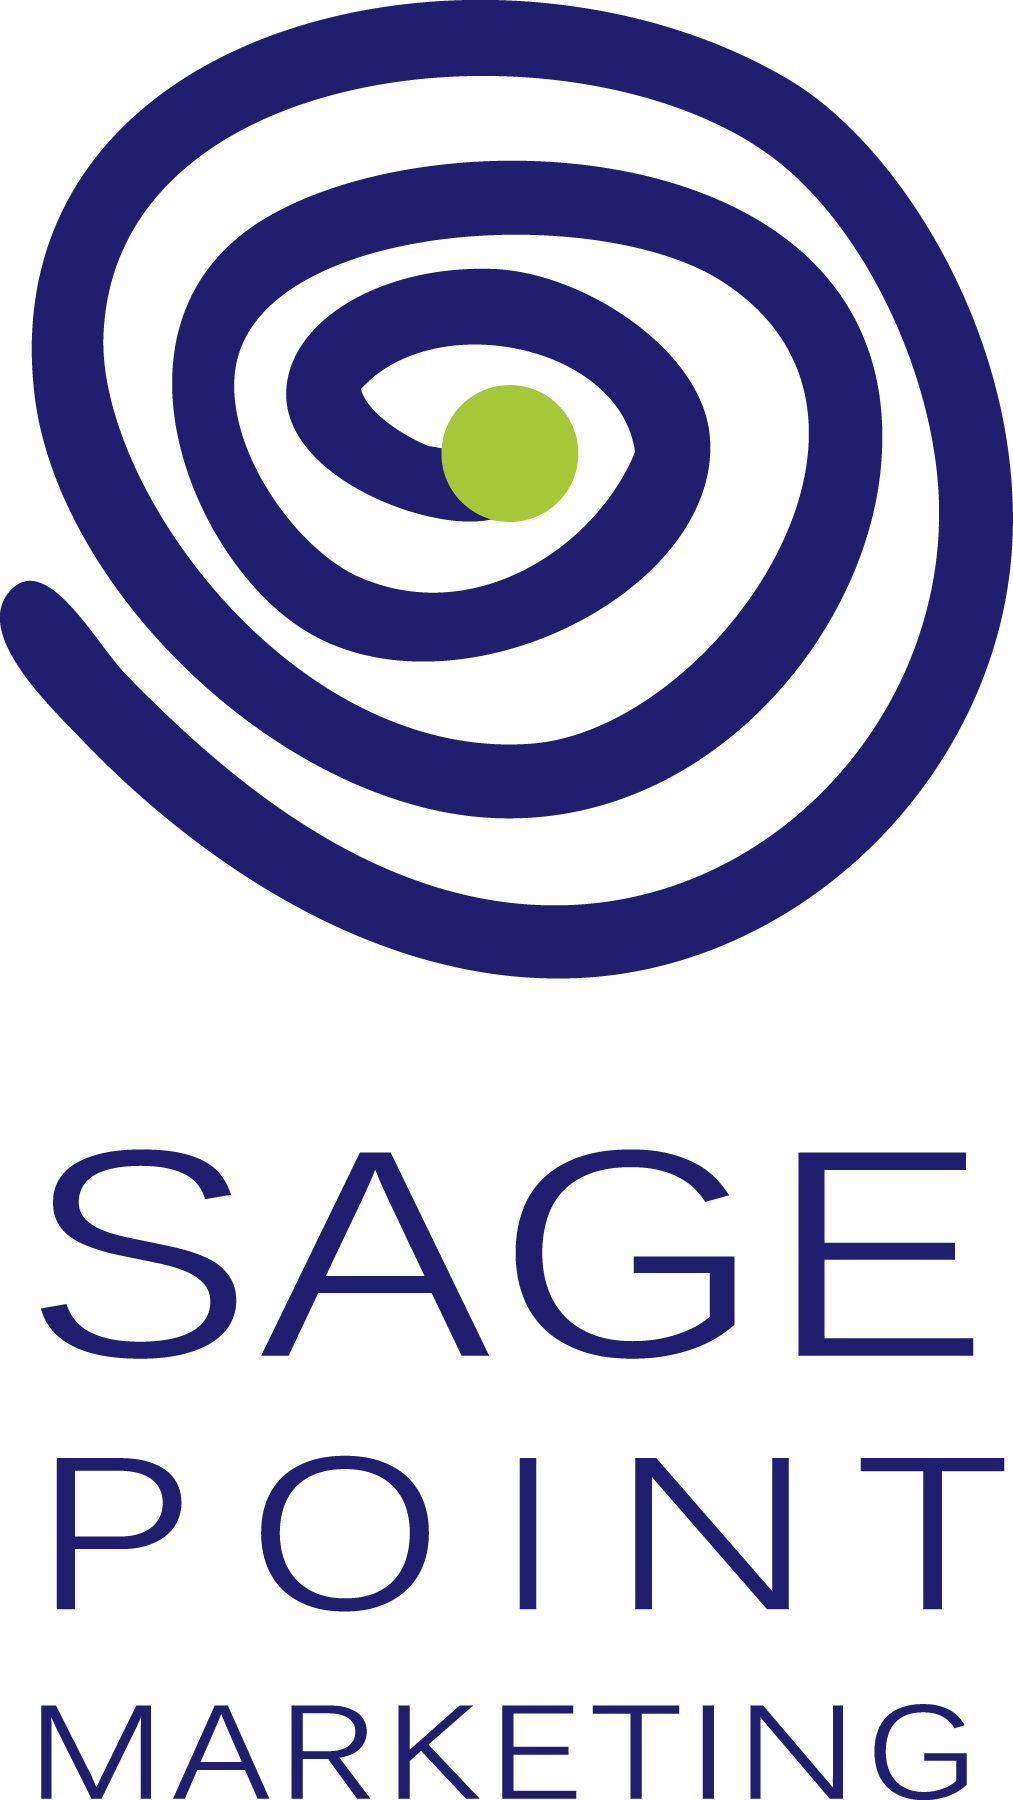 Sage Point – Communications for impact for nonprofits and NGOs